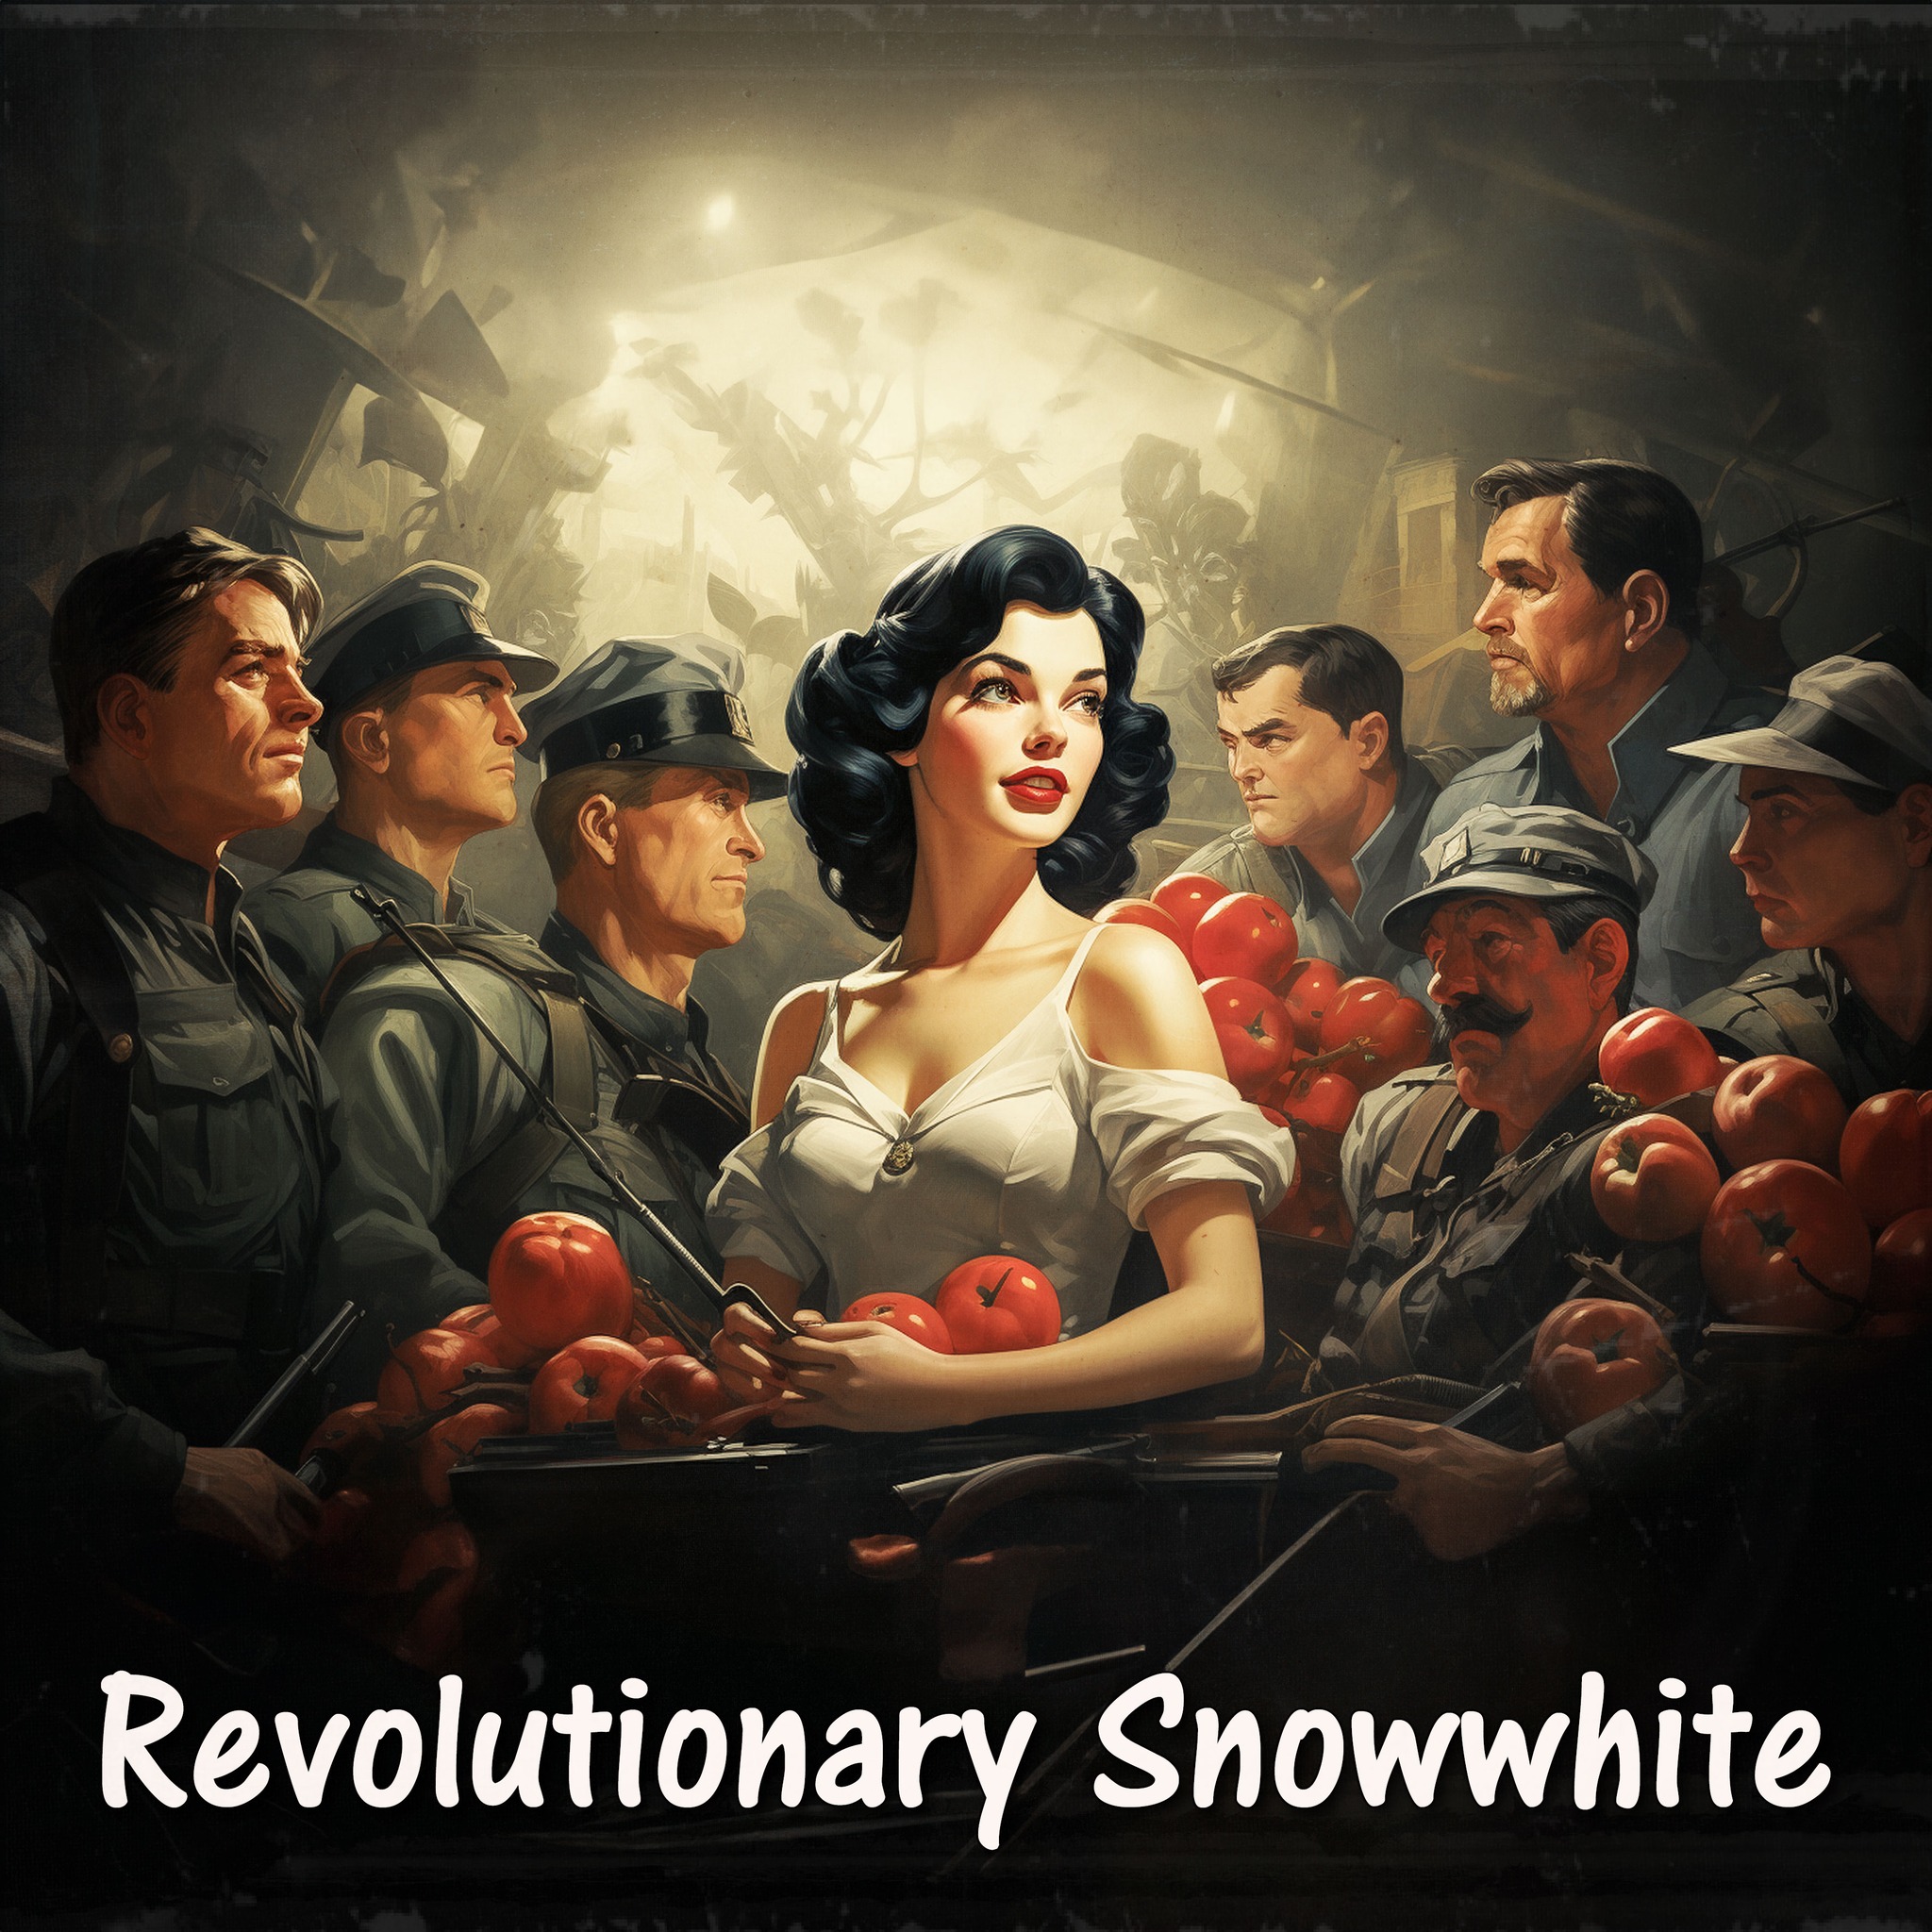 Snow White and the Seven Dwarfs’ will soon change its appearance and characters - movingworl.com